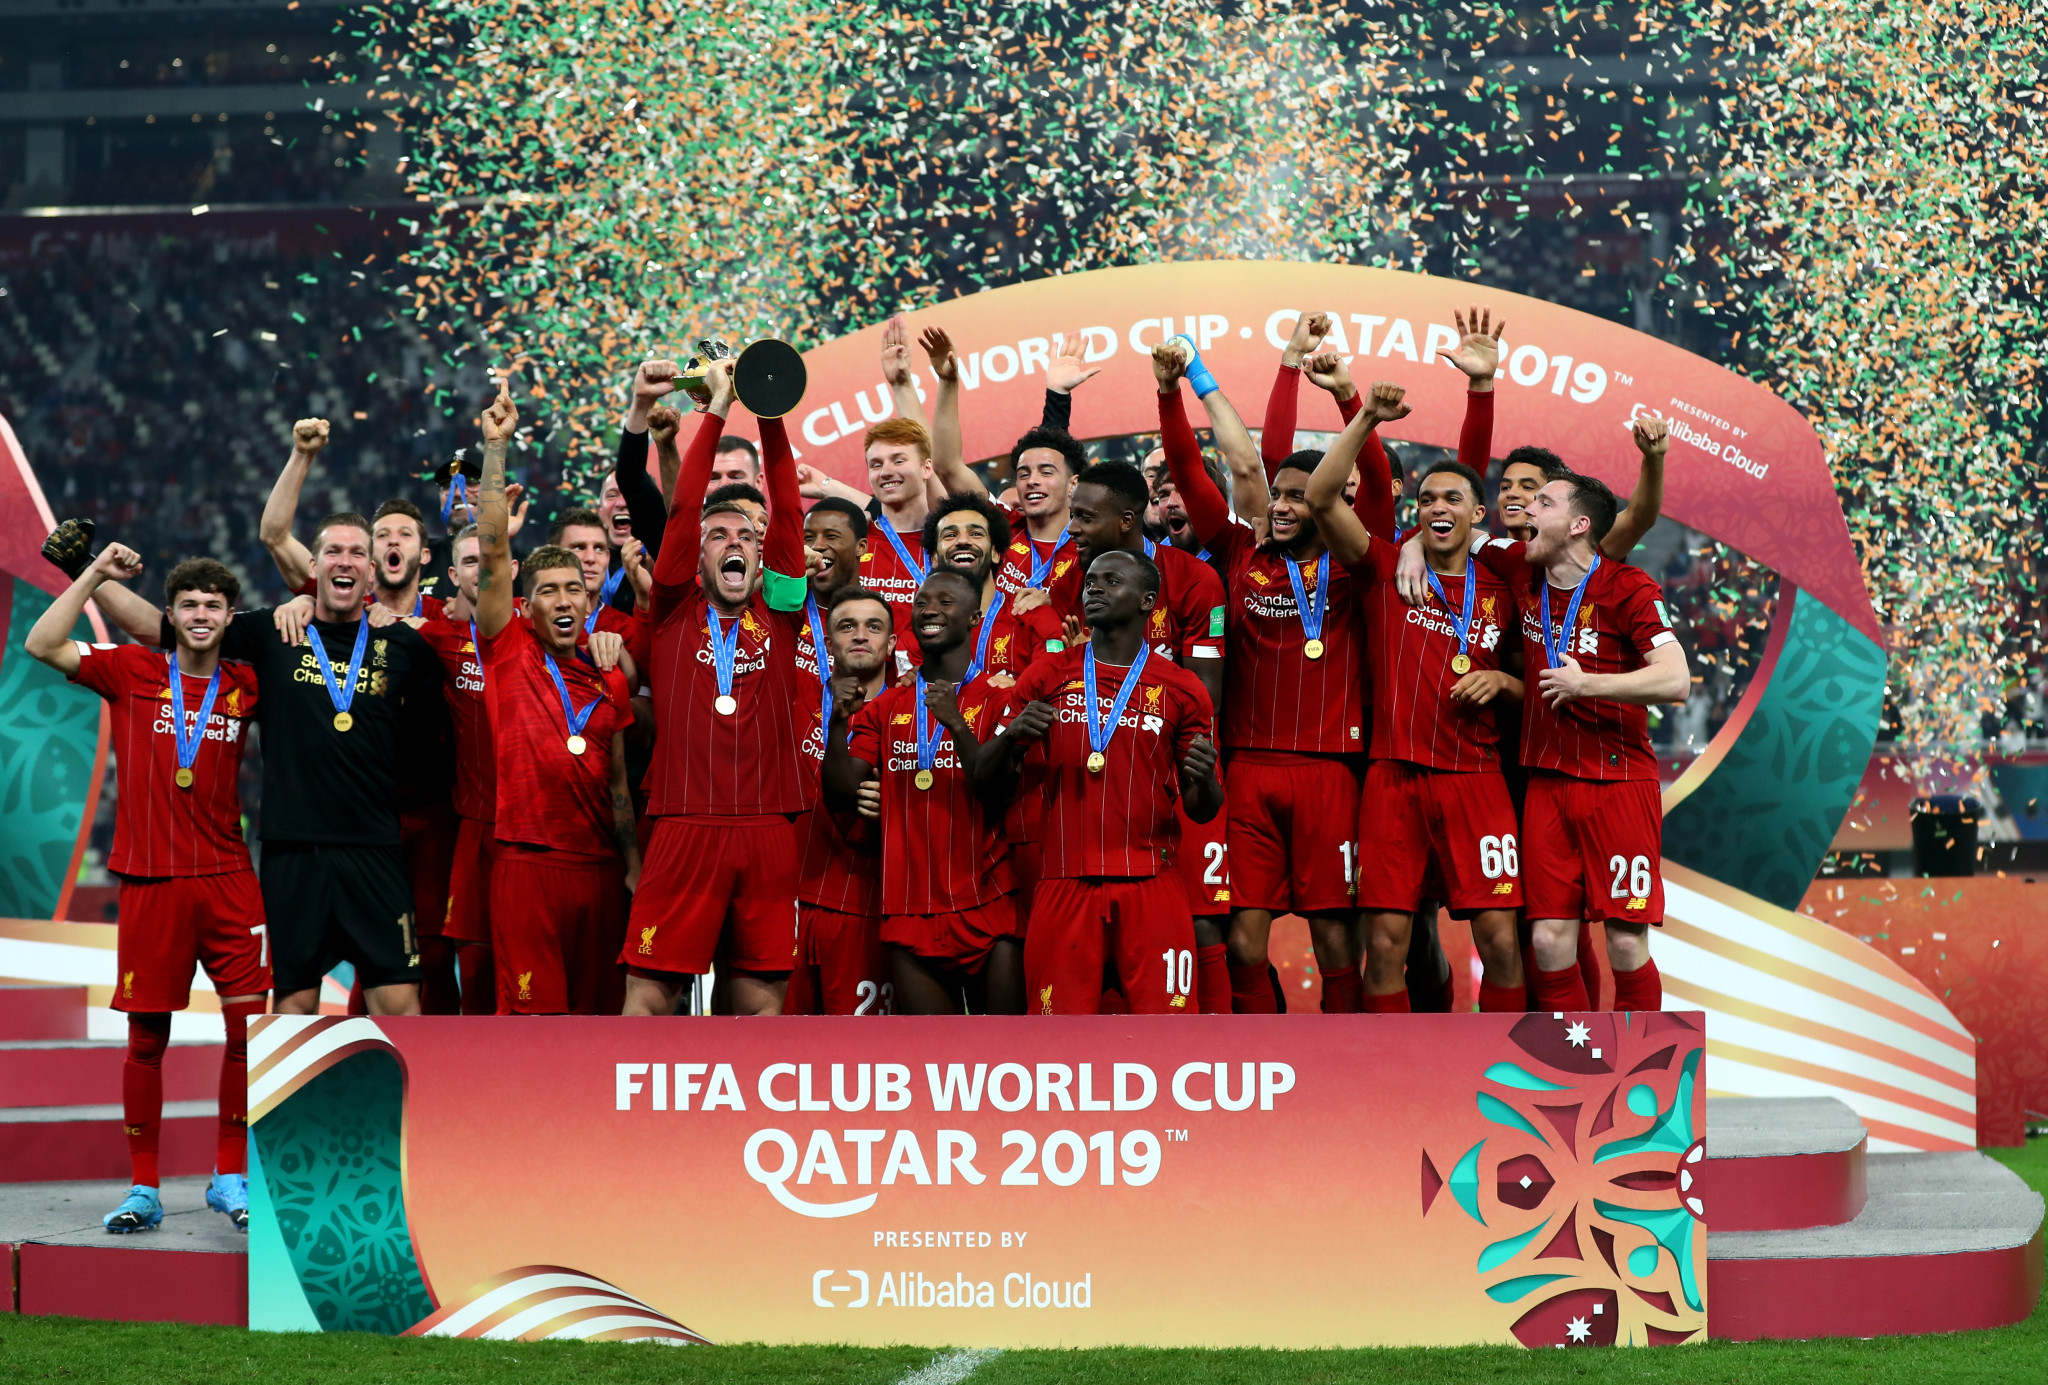 Liverpool won the FIFA Club World Cup in Qatar in December ©Getty Images